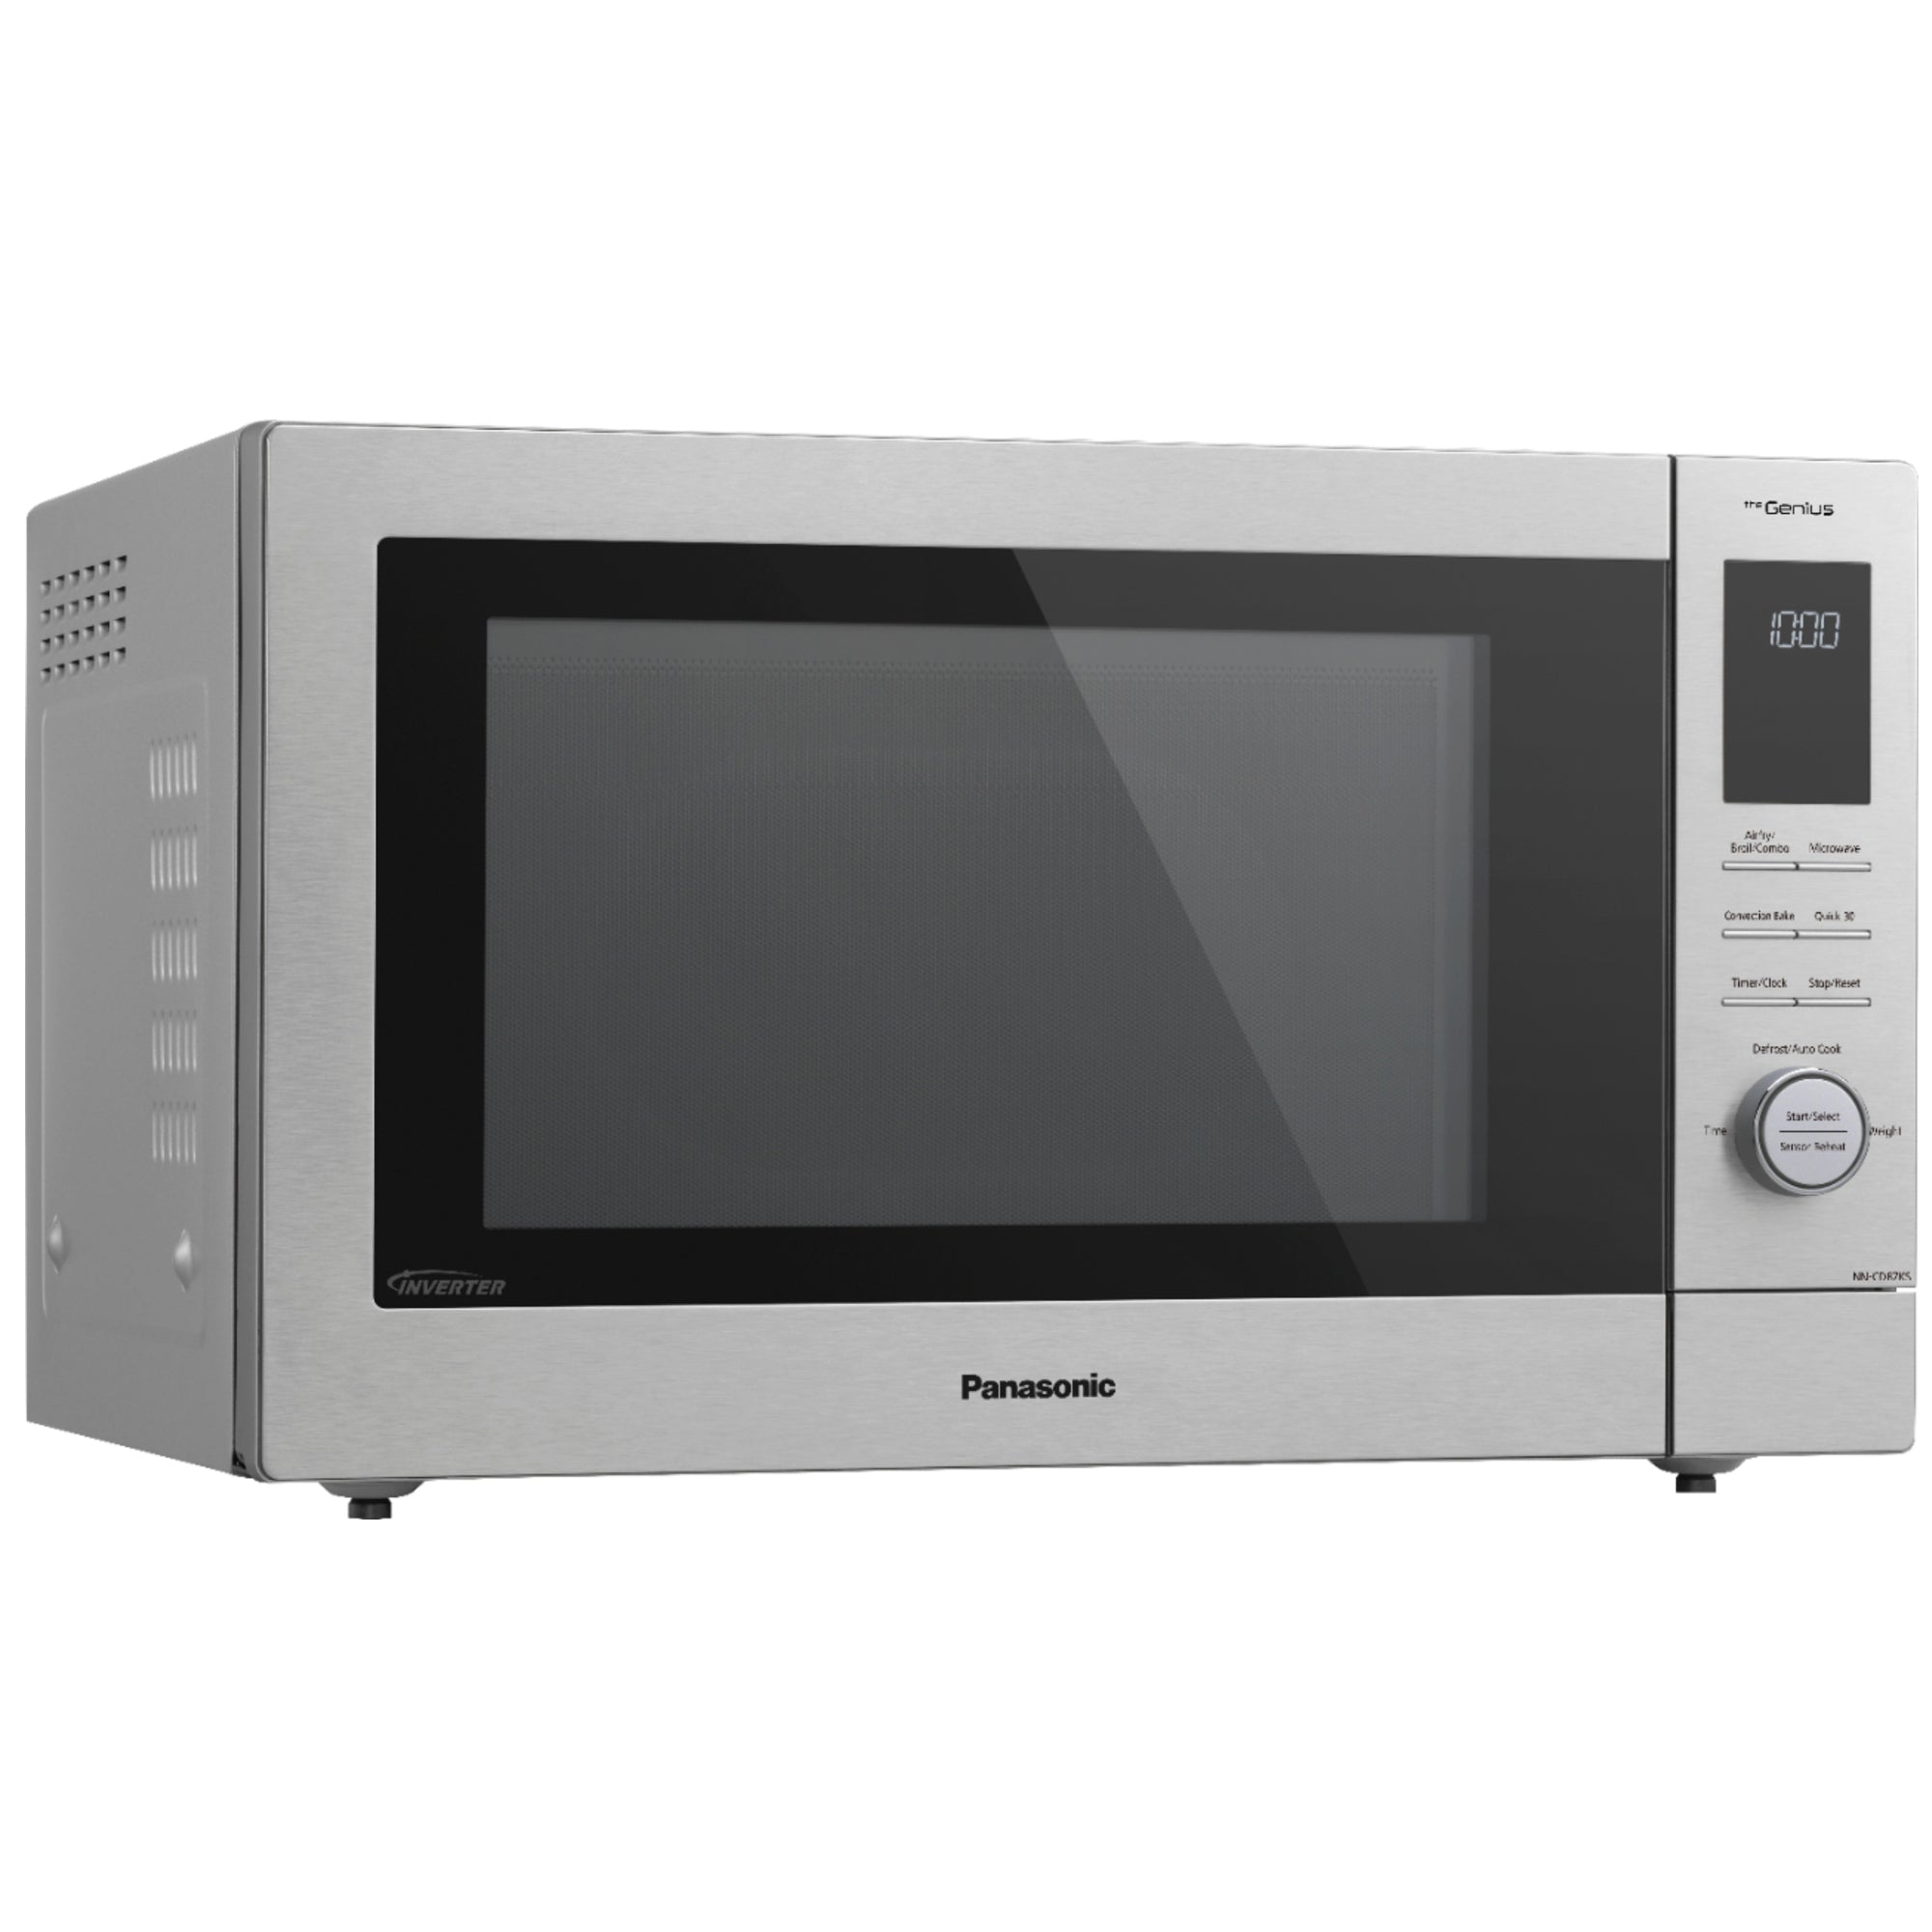 Panasonic HomeChef 4-in-1 Microwave Oven Review